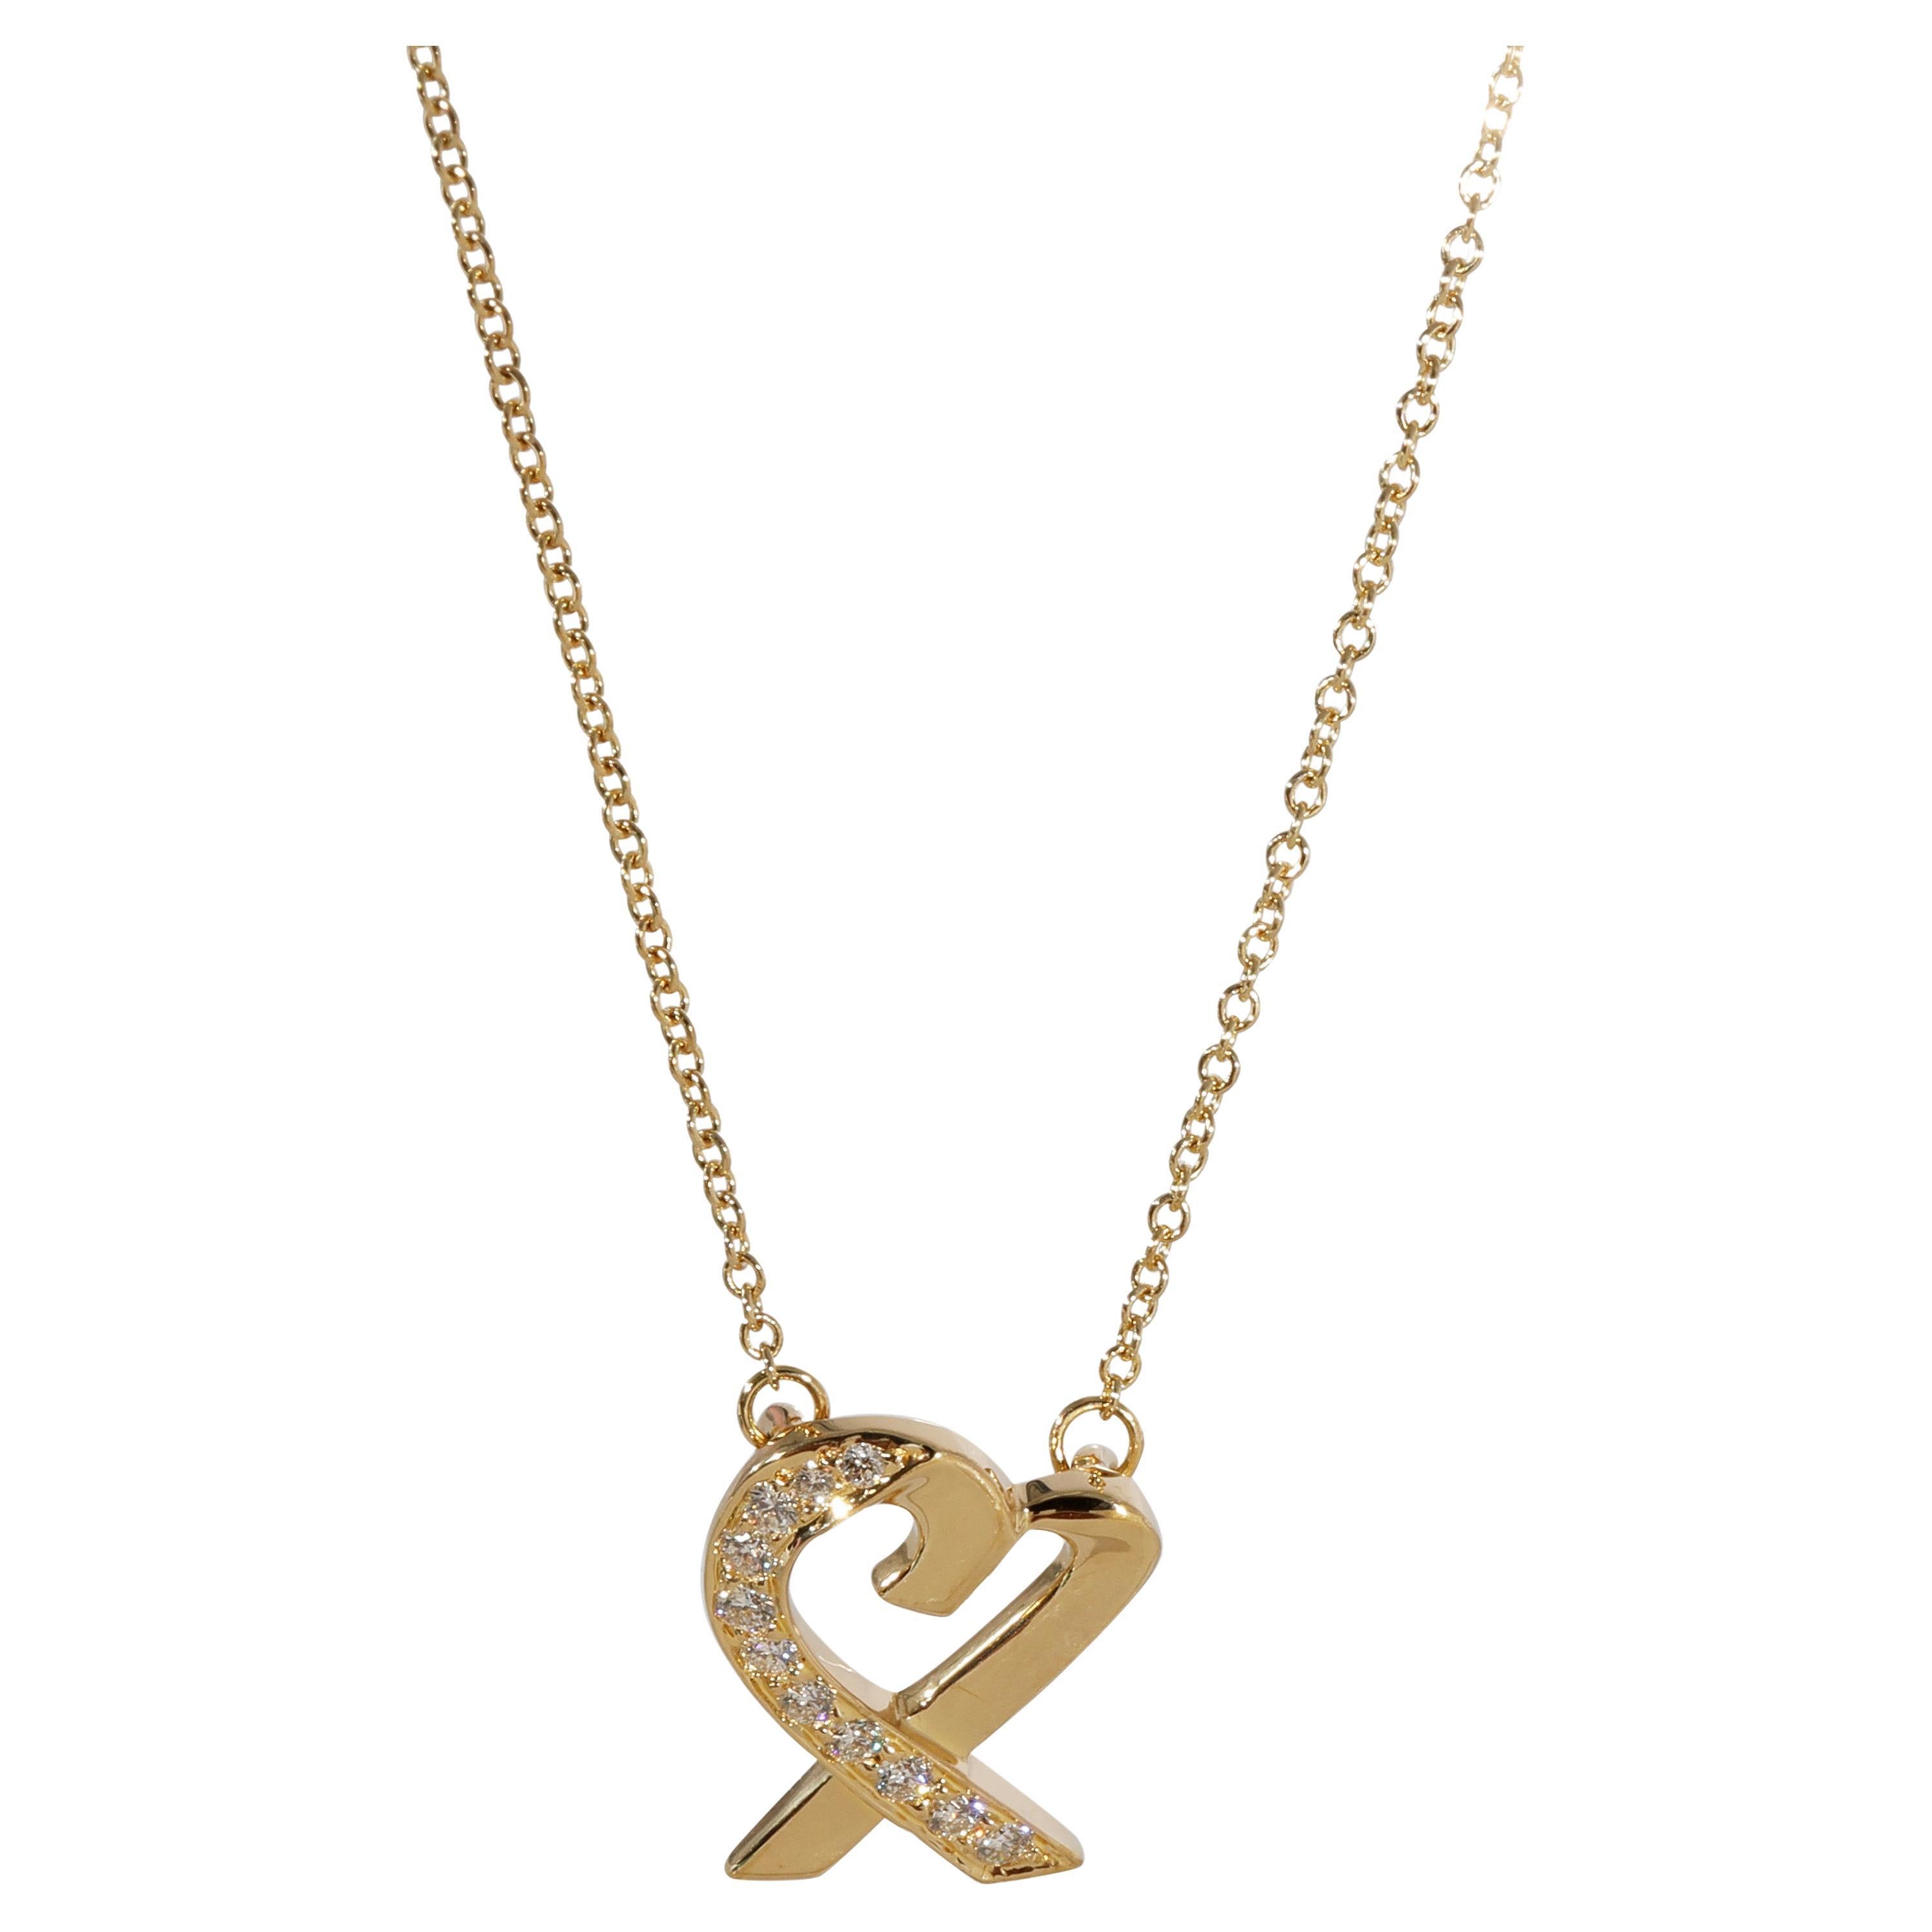 Tiffany & Co. Paloma Picasso Loving Heart Pendant in 18K Yellow Gold 0.14 CTW For Sale